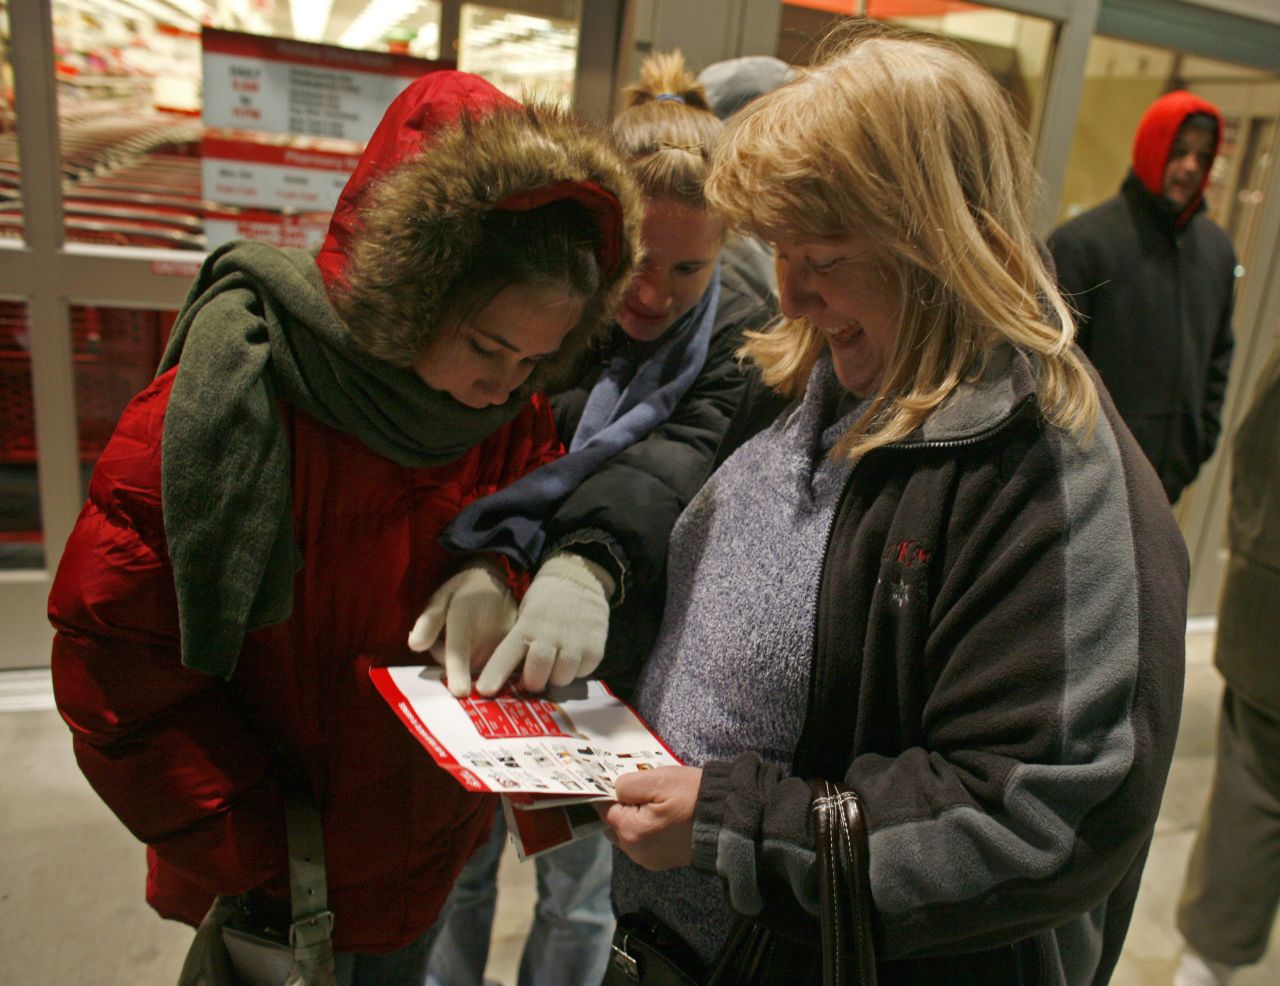 Jean Menarek, right, and her daughters Kayla and Deanna brave the cold Pleasant Prarie, Wisconsin temperatures on November 28, 2008 as they go over Target's Black Friday deals.